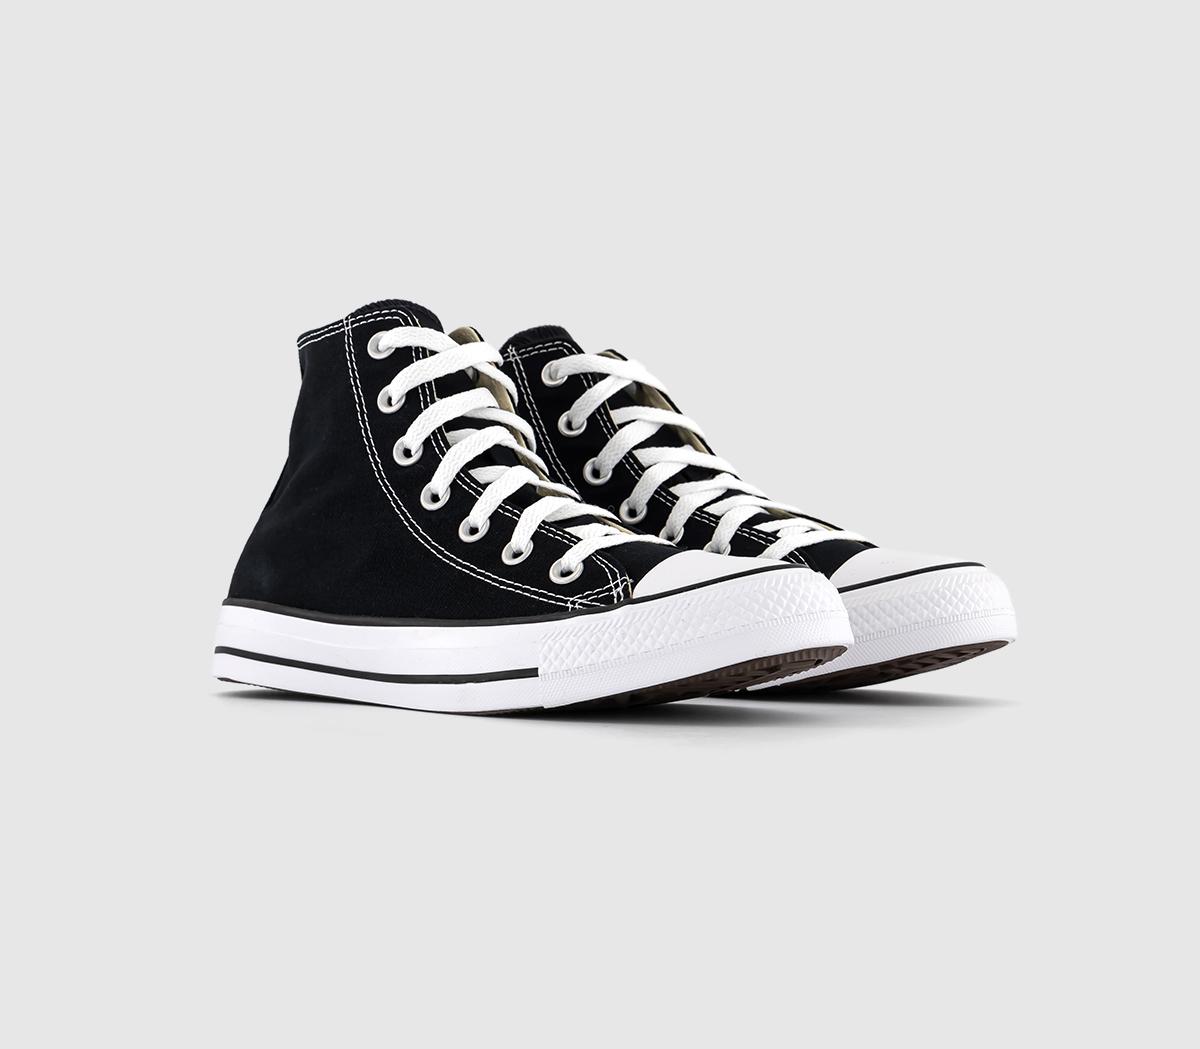 Converse All Star High Top Black And White Canvas Printed Classic Trainers, 8